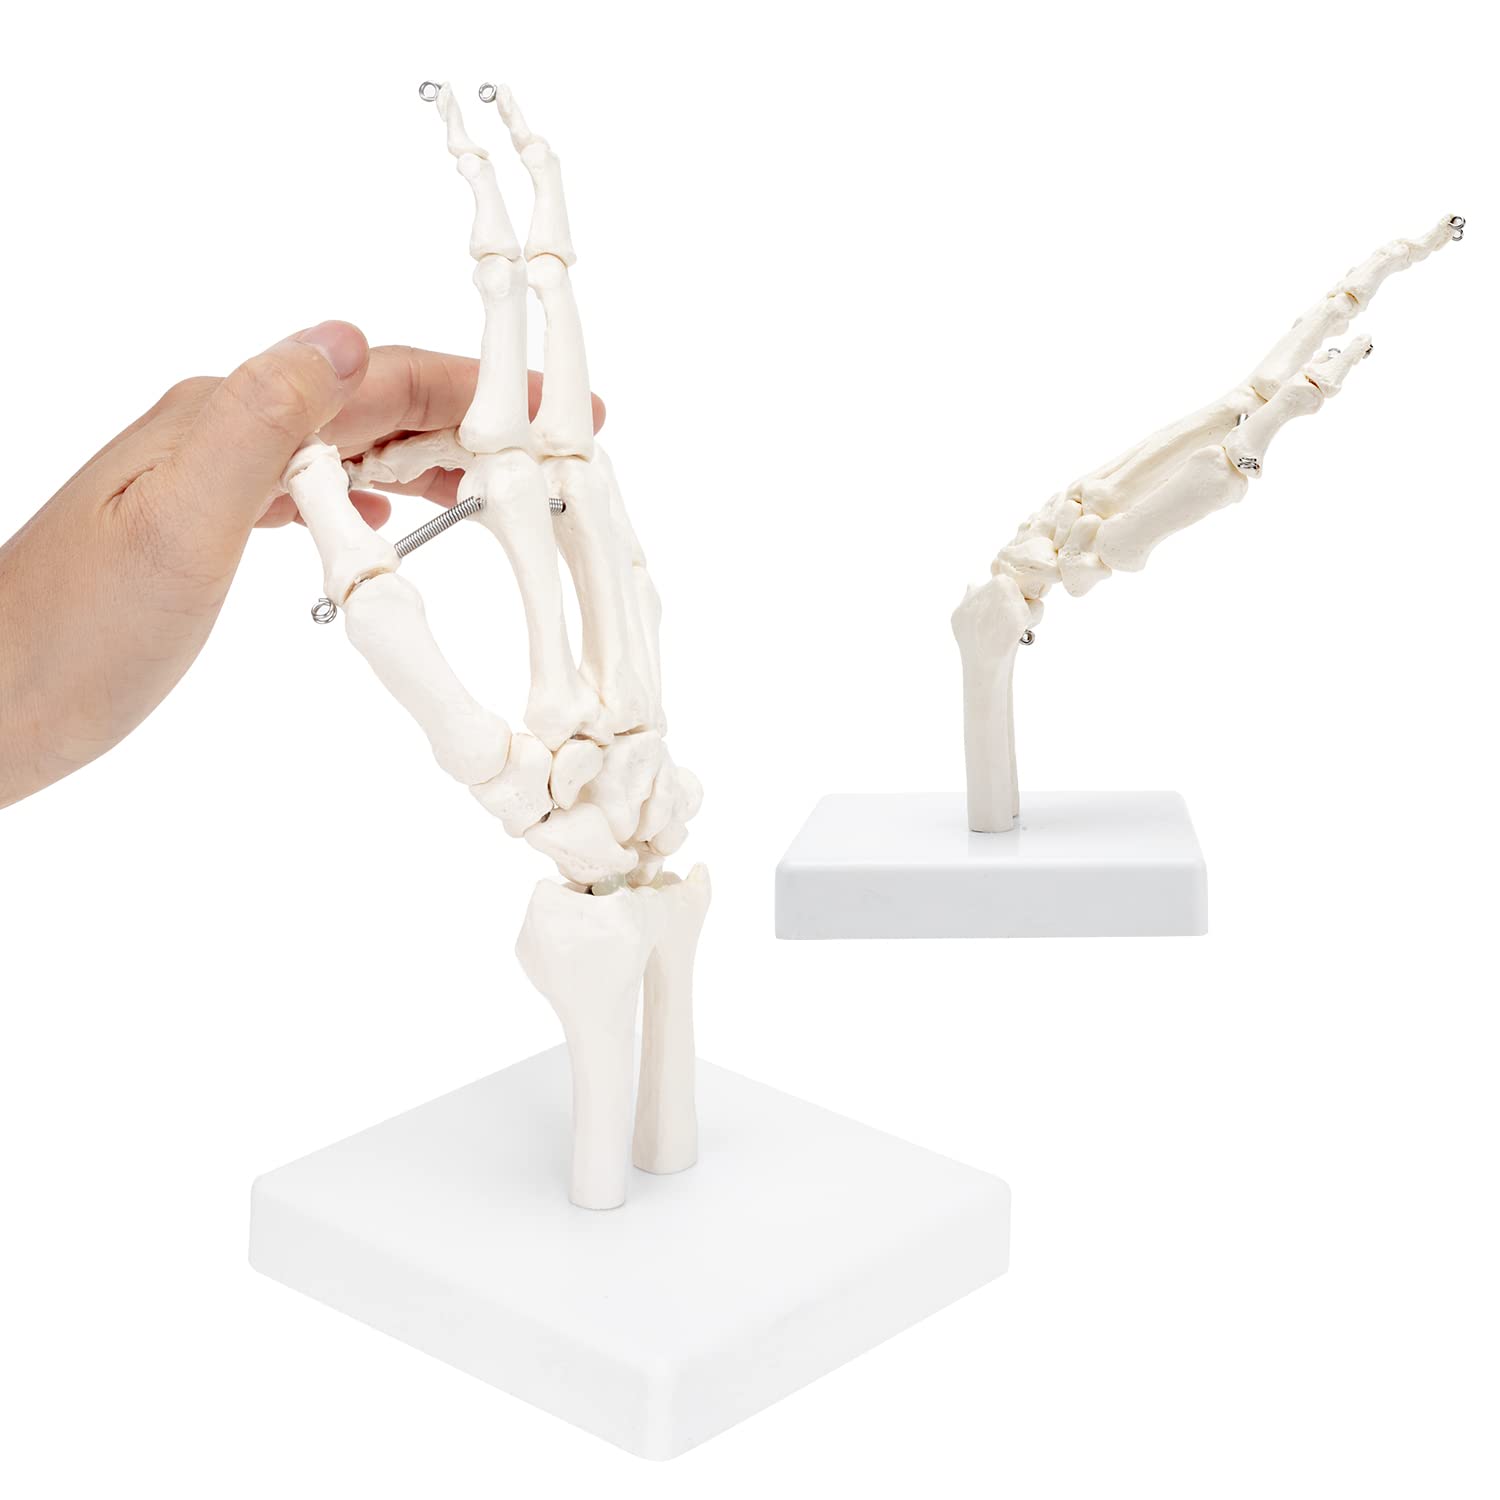 RONTEN Hand Joint Model Hand Skeleton Anatomical Model Showing Ulna and Radius